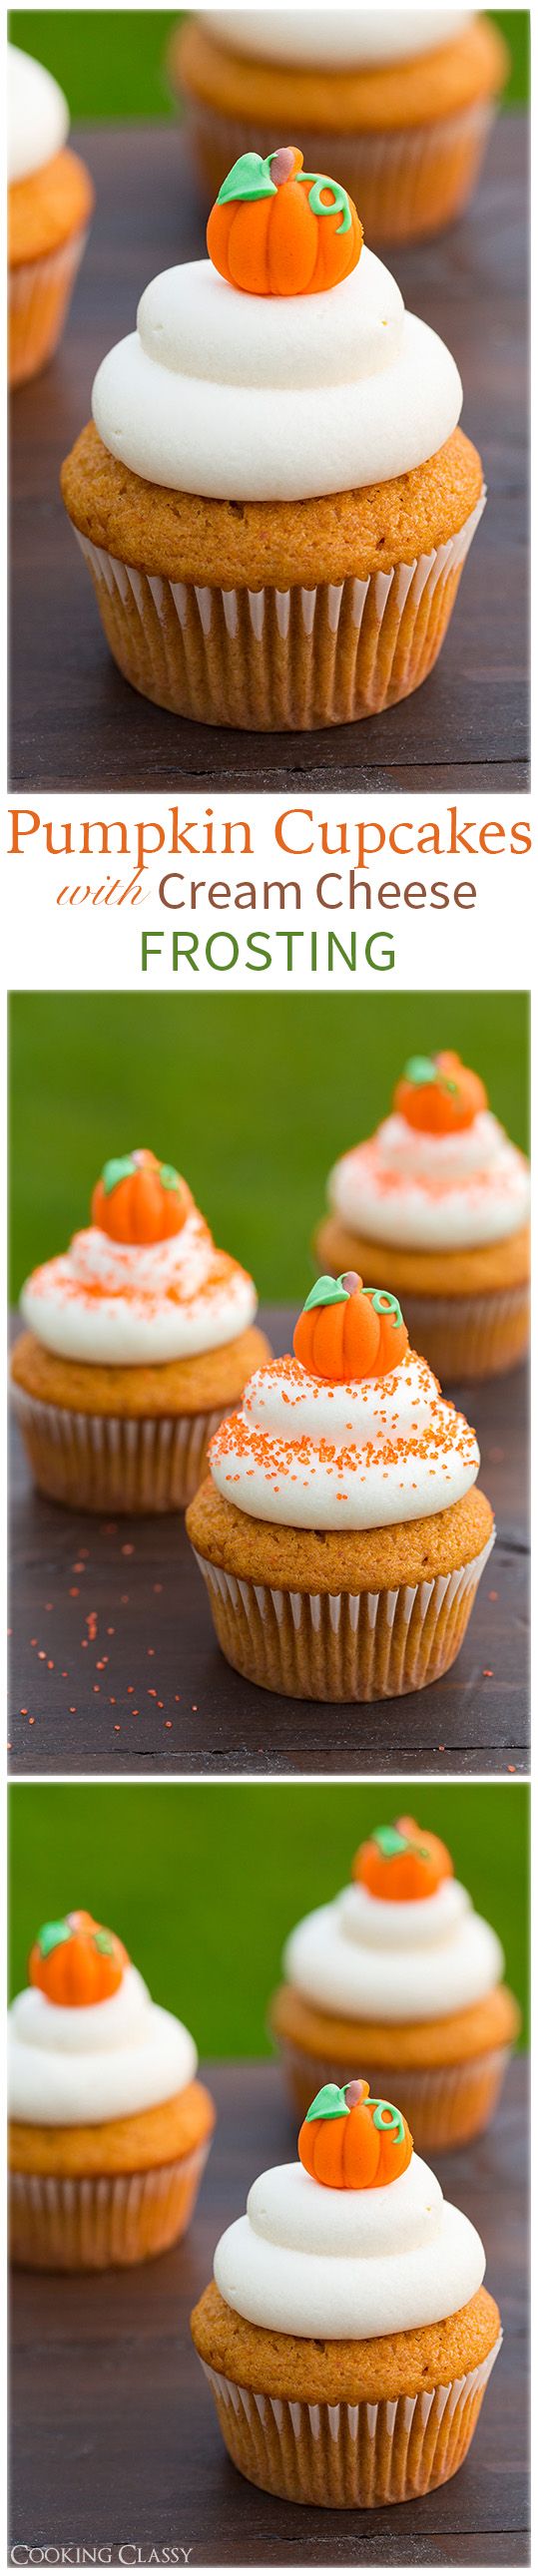 Pumpkin Cupcakes with Cream Cheese Frosting | #cheese #Cream #cupcakes #Frosting #Pumpkin #with